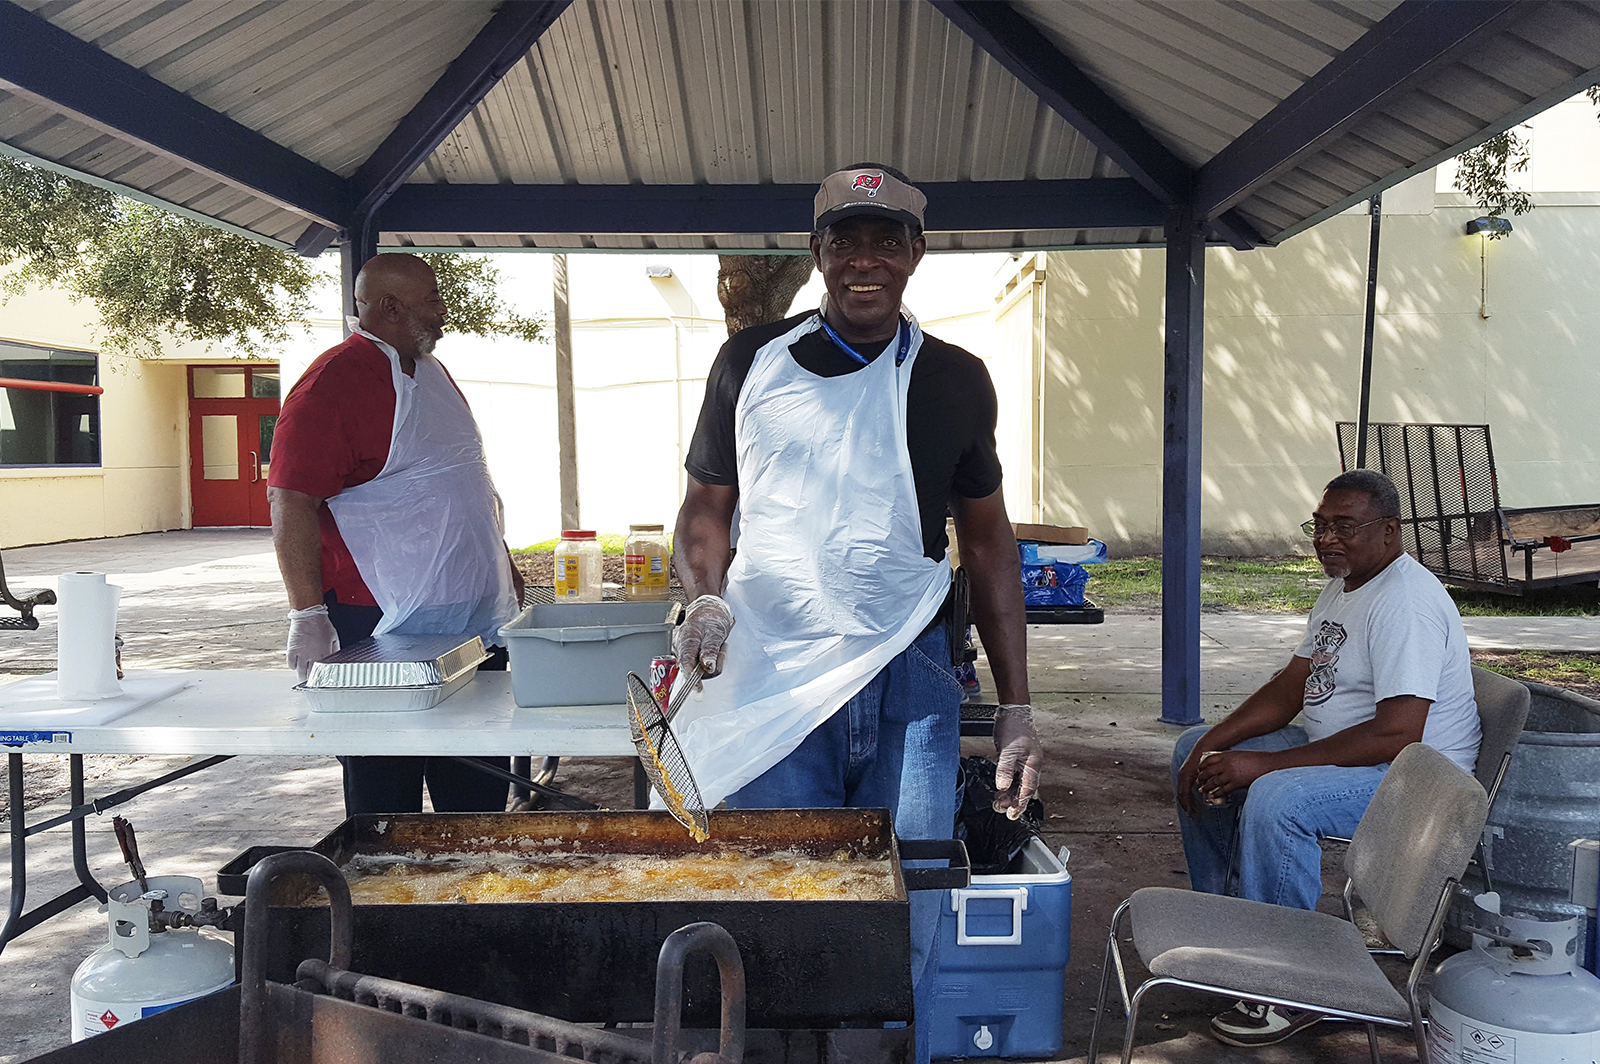 Fried Fish & Fellowship in the Park